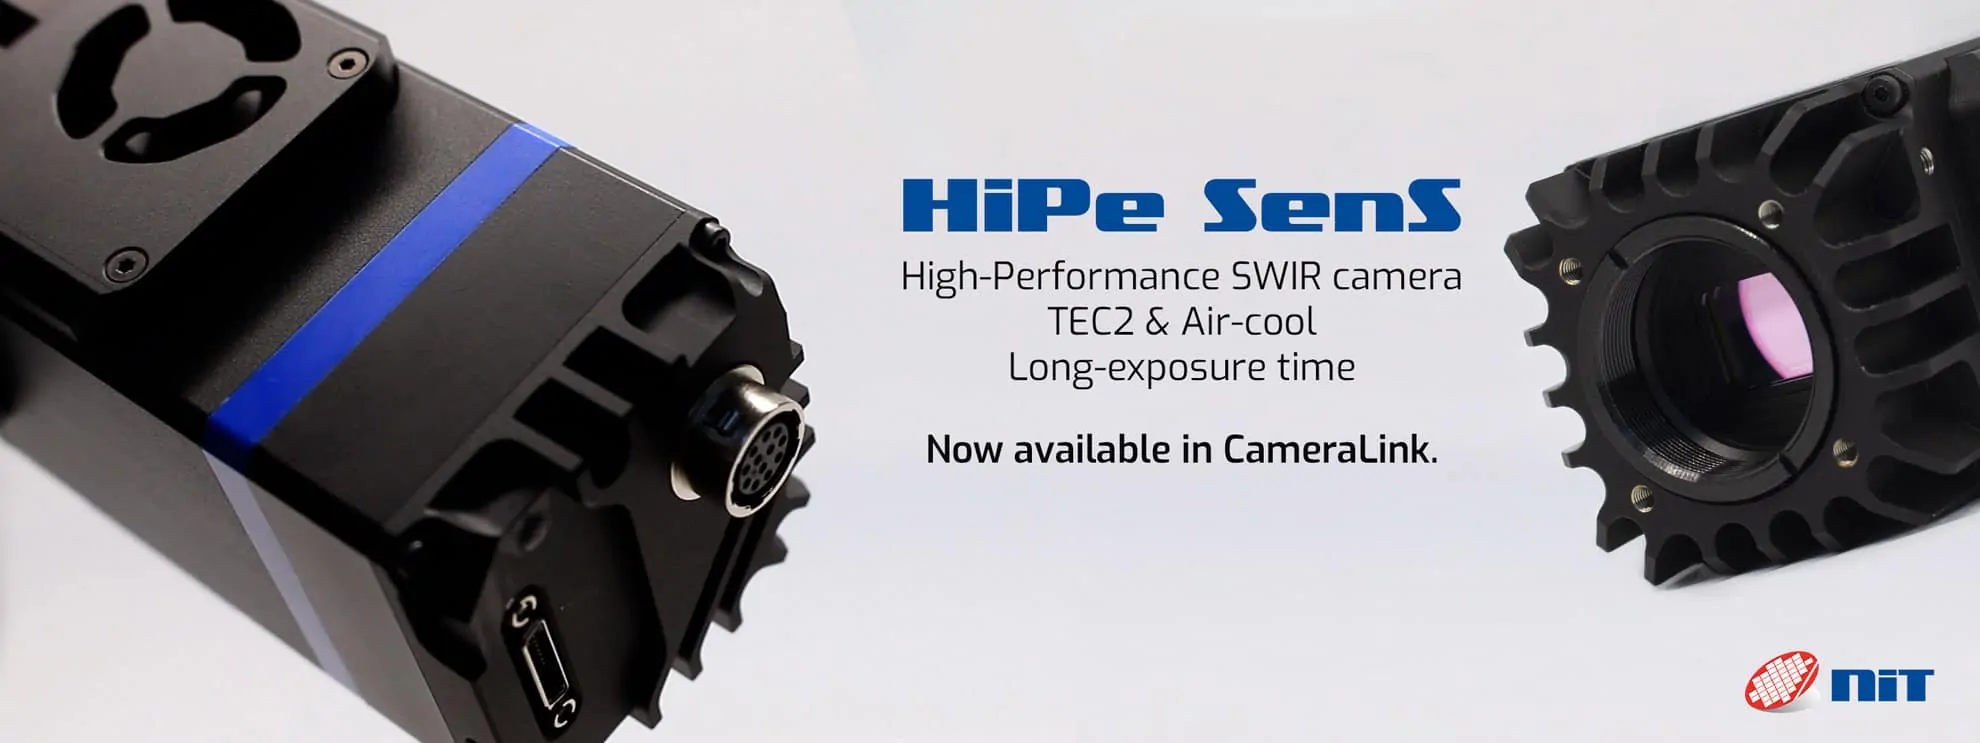 HiPe SenS CameraLink now available